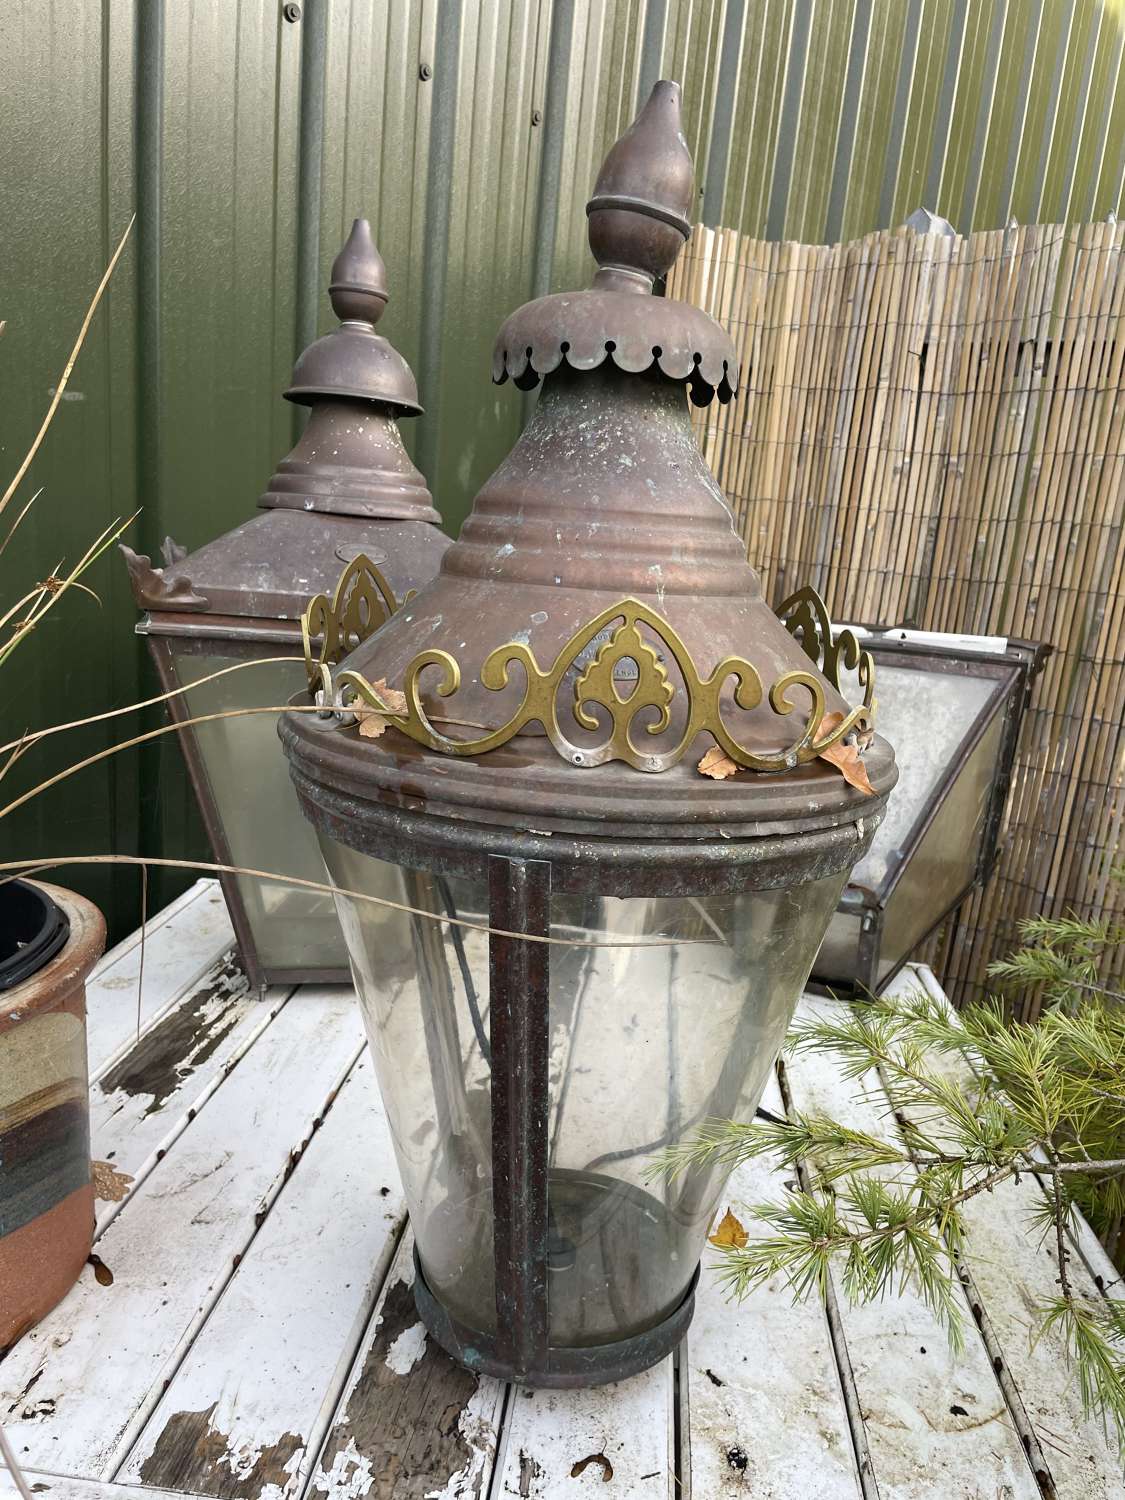 A selection of Victorian style street lanterns